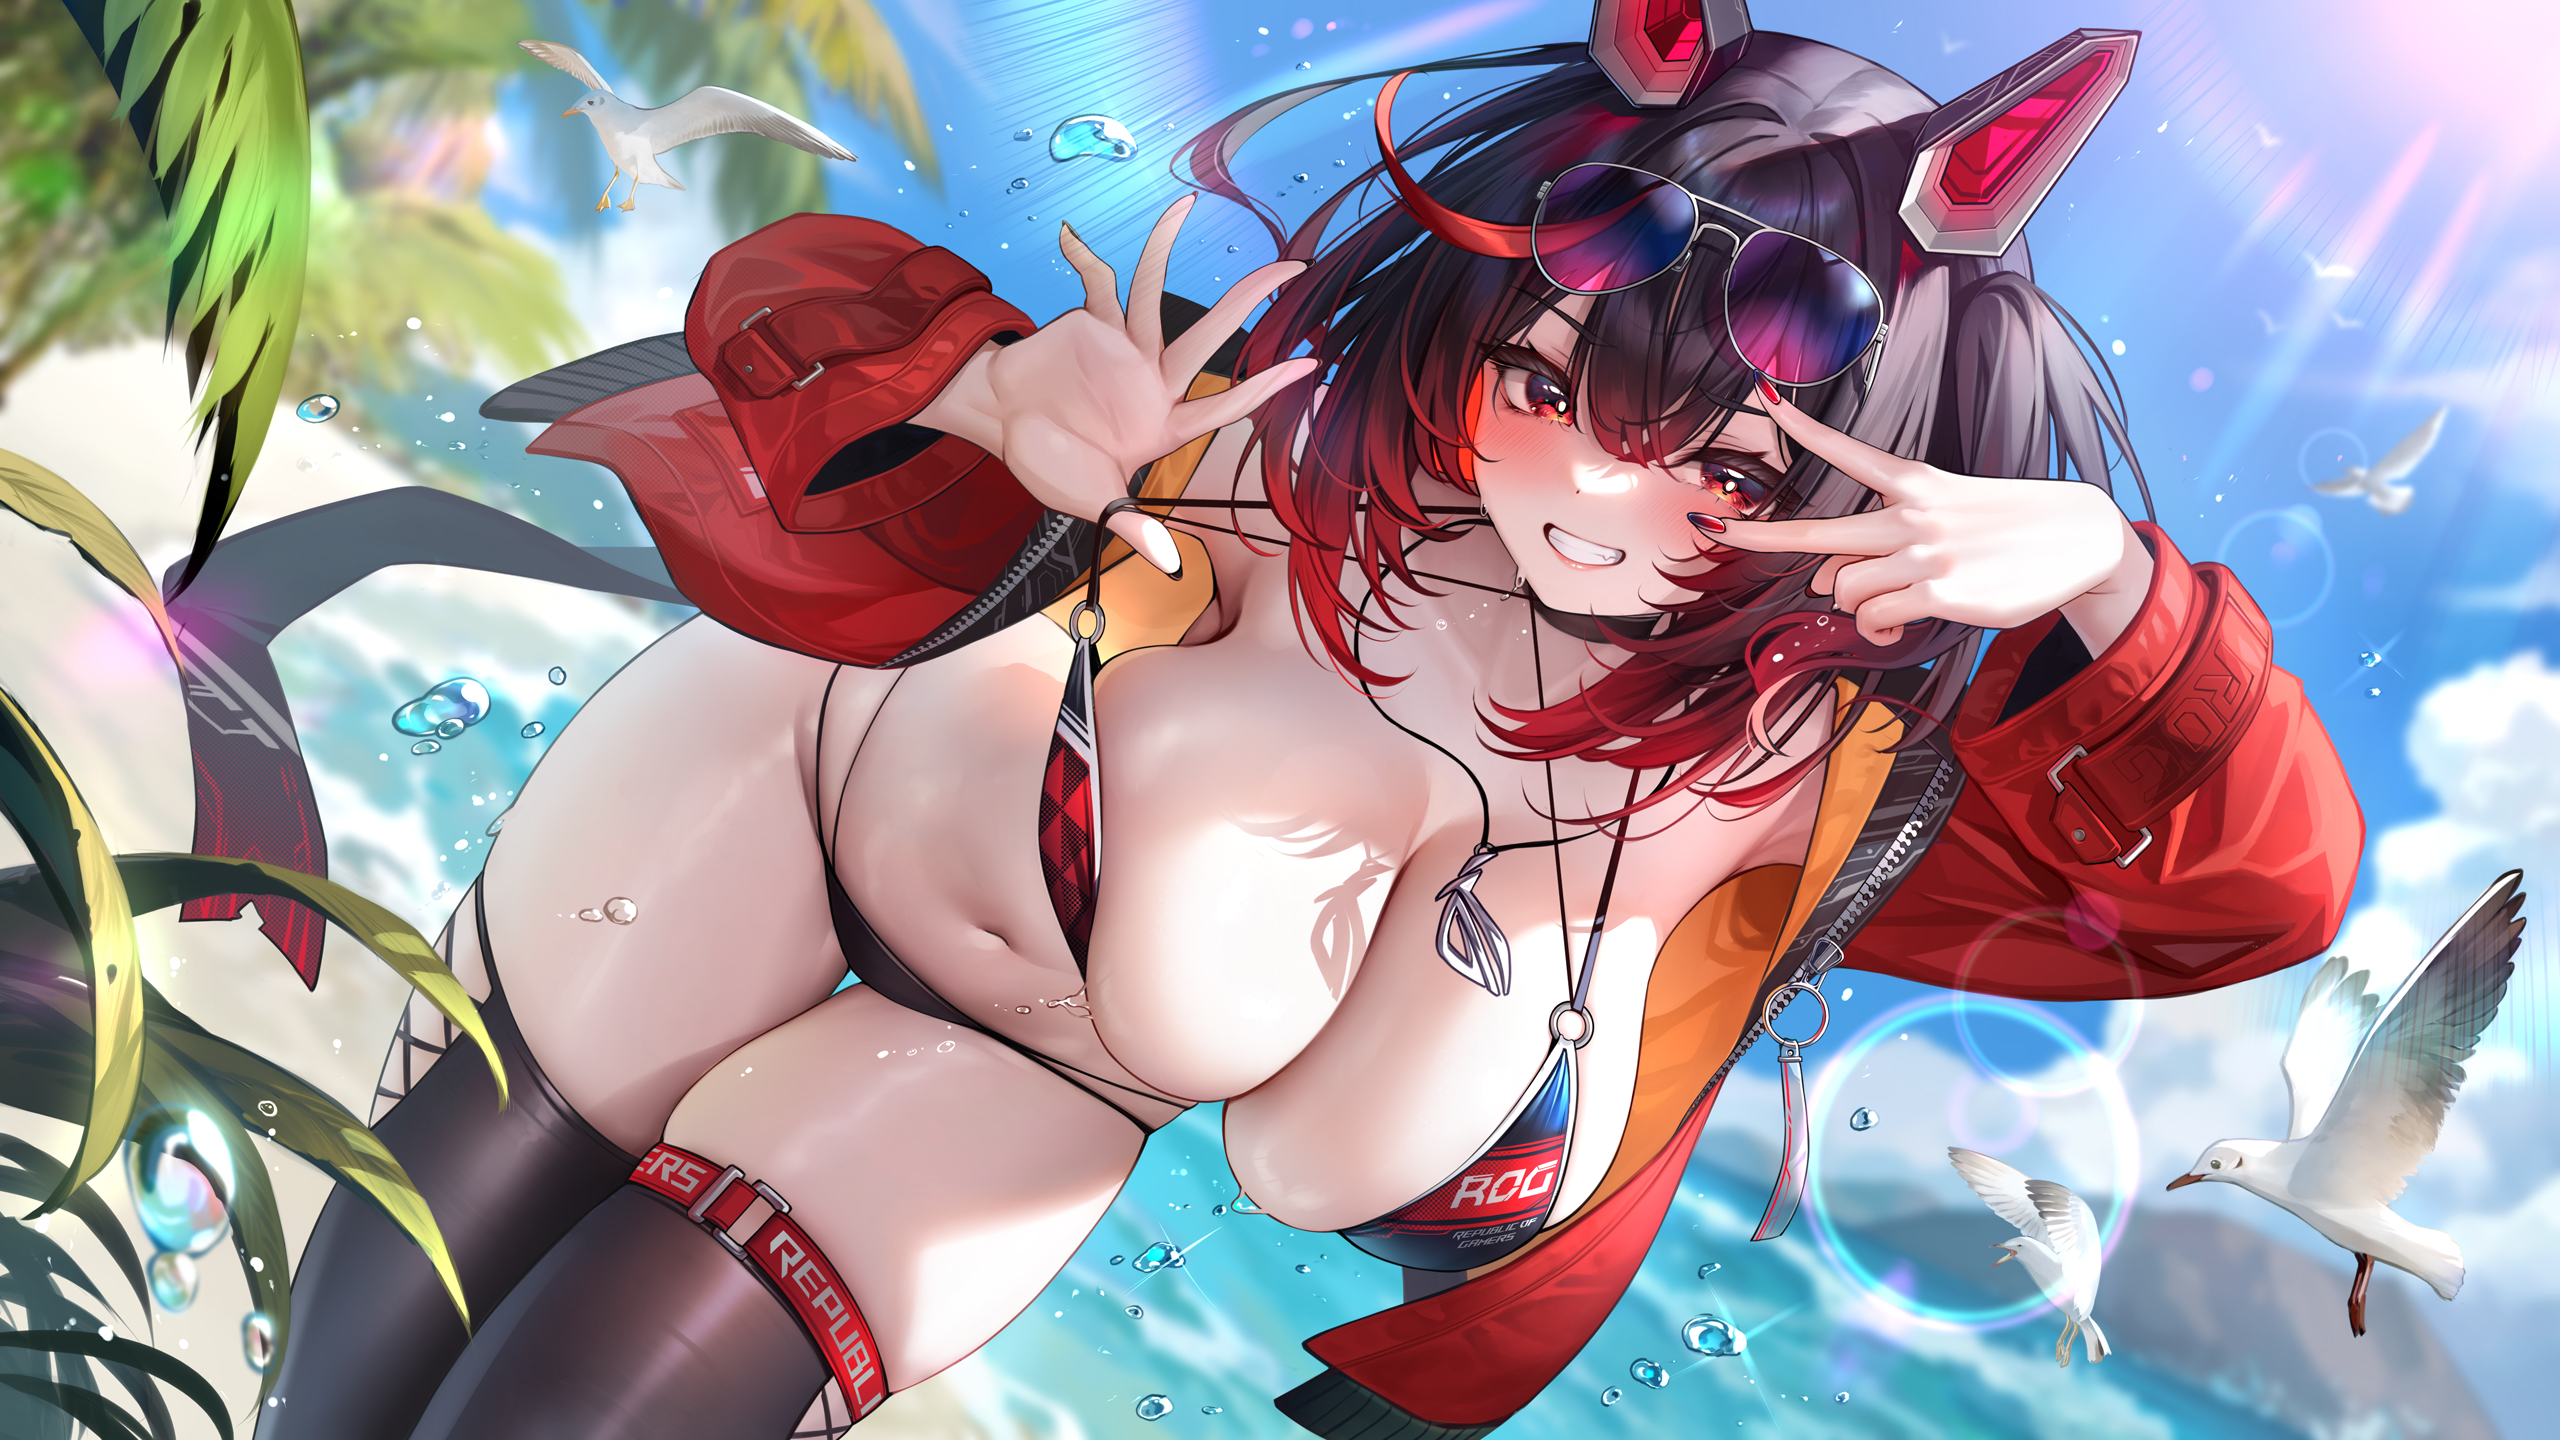 Anime 2560x1440 anime girls MeIoN Rog (VTuber) bikini swimwear garter (cloth) open shirt thigh-highs wet beach seagulls animal ears two tone hair looking at viewer smiling outdoors women outdoors birds animals sky clouds gradient hair stockings water drops blushing depth of field water waves sand women on beach sunlight hanging boobs jacket huge breasts thighs pulling clothing bent over long nails sunglasses peace sign